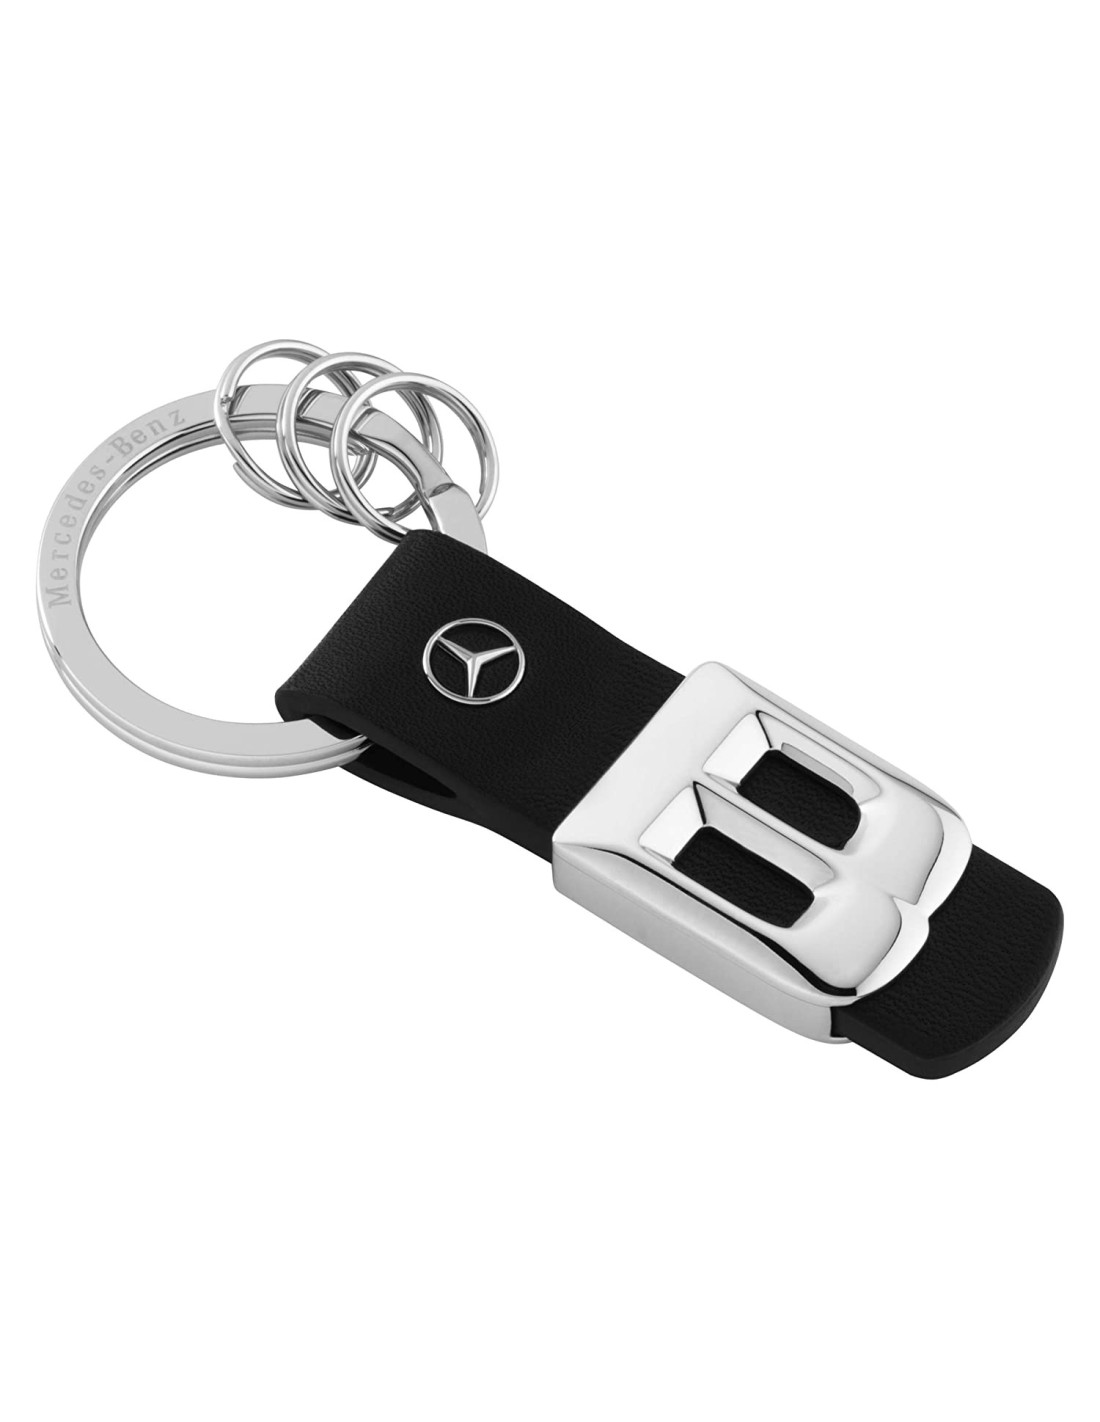 Model Series E-Class Key ring  Mercedes-Benz Lifestyle Collection